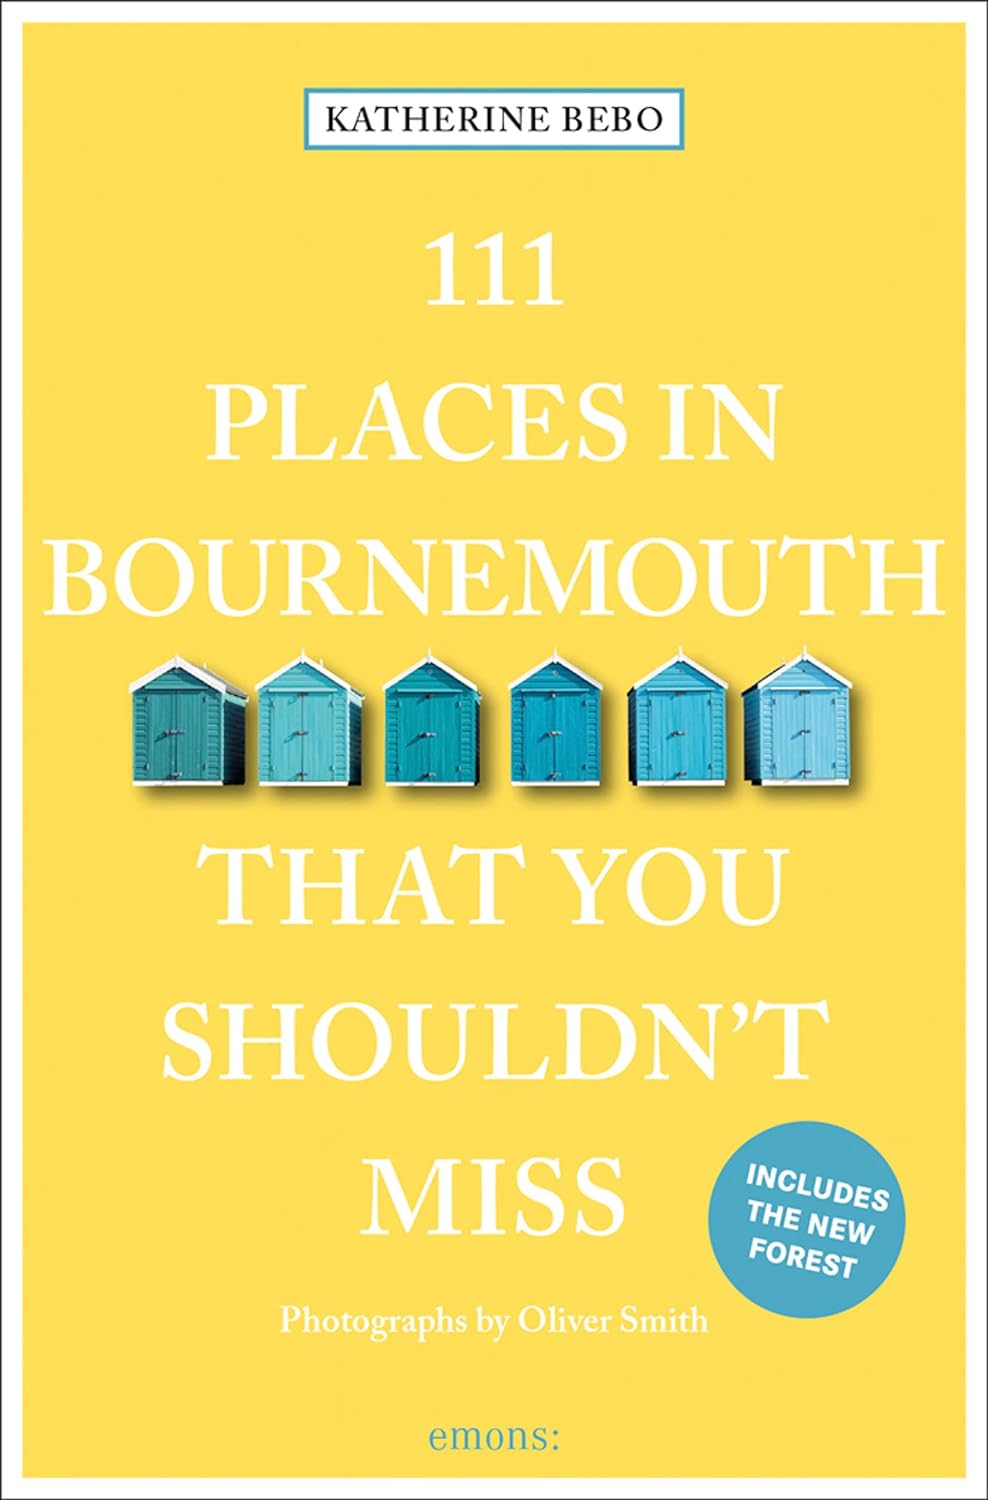 Online bestellen: Reisgids 111 places in Places in Bournemouth That You Shouldn't Miss | Emons